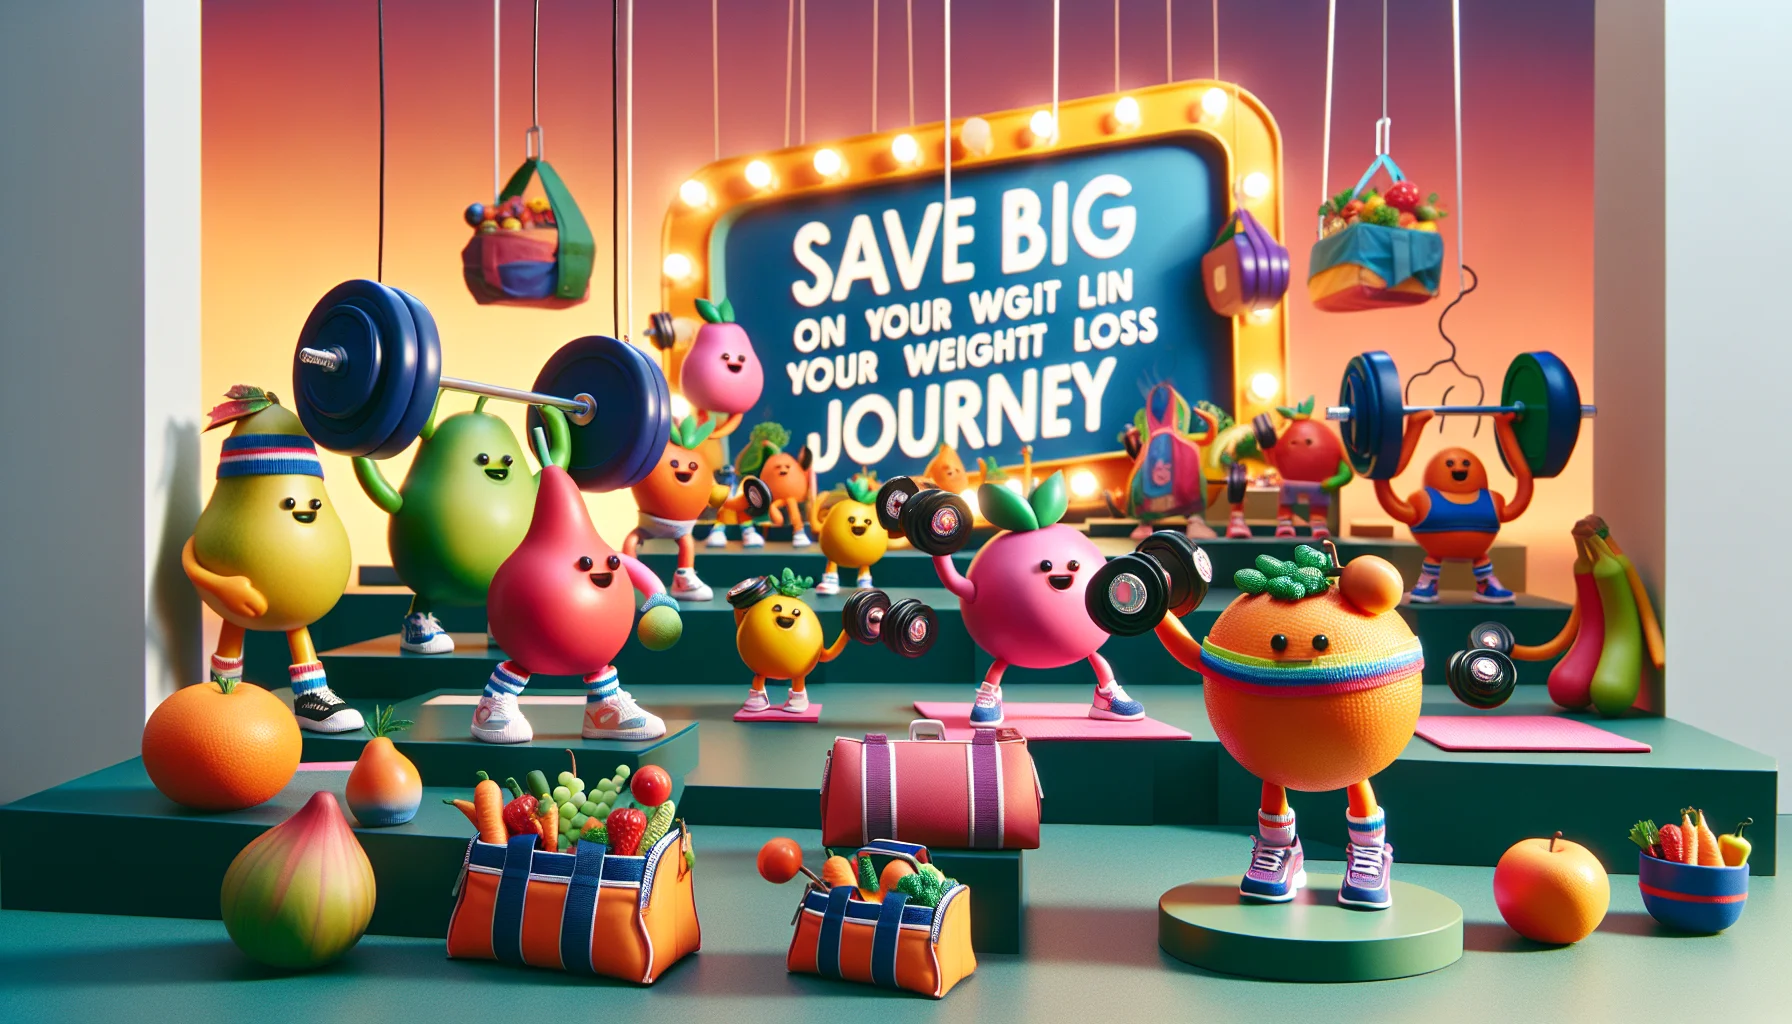 A playfully designed scene promoting weight loss journey through exercise. The image showcases a humorous scenario, where colorful animated fruits and vegetables lifting miniature barbells. They are donning athletic gear, cheering and motivating onlookers. In the background, a large, whimsical sign that reads 'Save Big on Your Weight Loss Journey' stands prominently, emphasizing the importance of healthy diet and regular workout. To add an extra layer of humor, designer gym bags filled with smaller fruits and vegetables are strewn about, 'working out' in their own miniature gym setups. The entire atmosphere is full of energy, encouraging viewers to take up healthy habits.